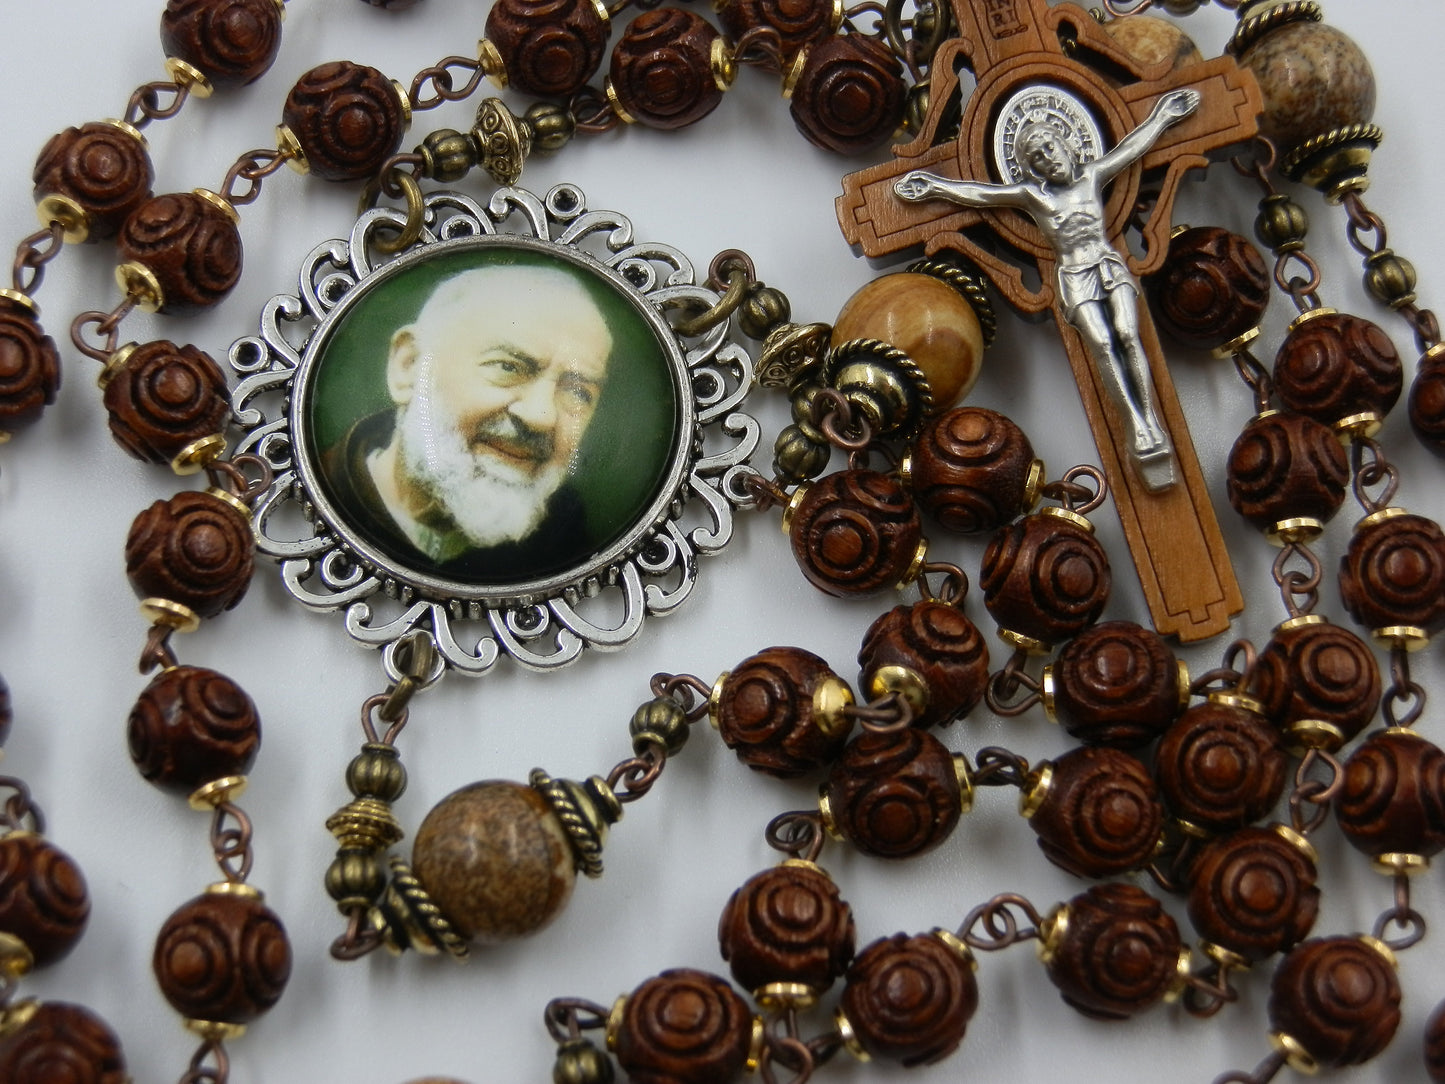 Handcrafted wooden St Padre Pio Rosaries, St. Padre Pio beads, wooden Rosary beads, St. Benedict Crucifix, Vintage style rosary beads.